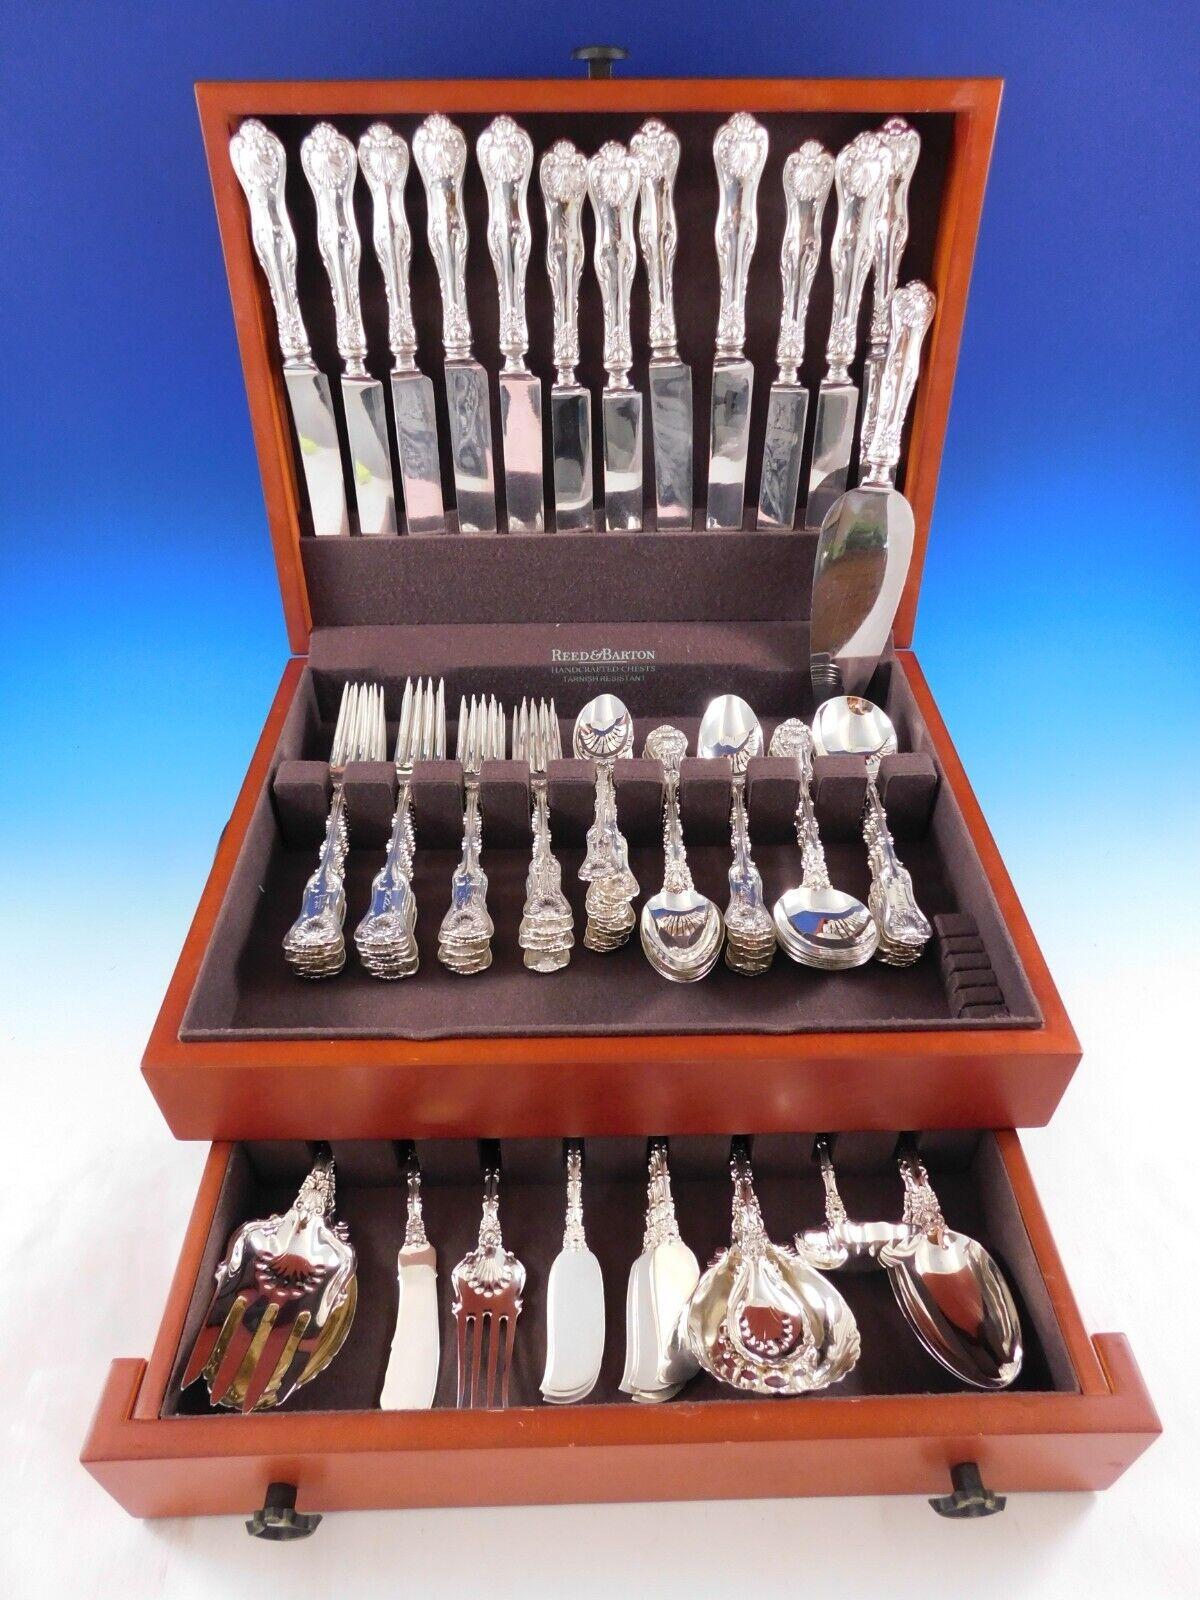 Monumental Dinner Size Imperial Queen by Whiting Sterling Silver Flatware set with classic shell motif - 94 pieces. Cet ensemble comprend :

12 Couteaux de banquet, 10 5/8